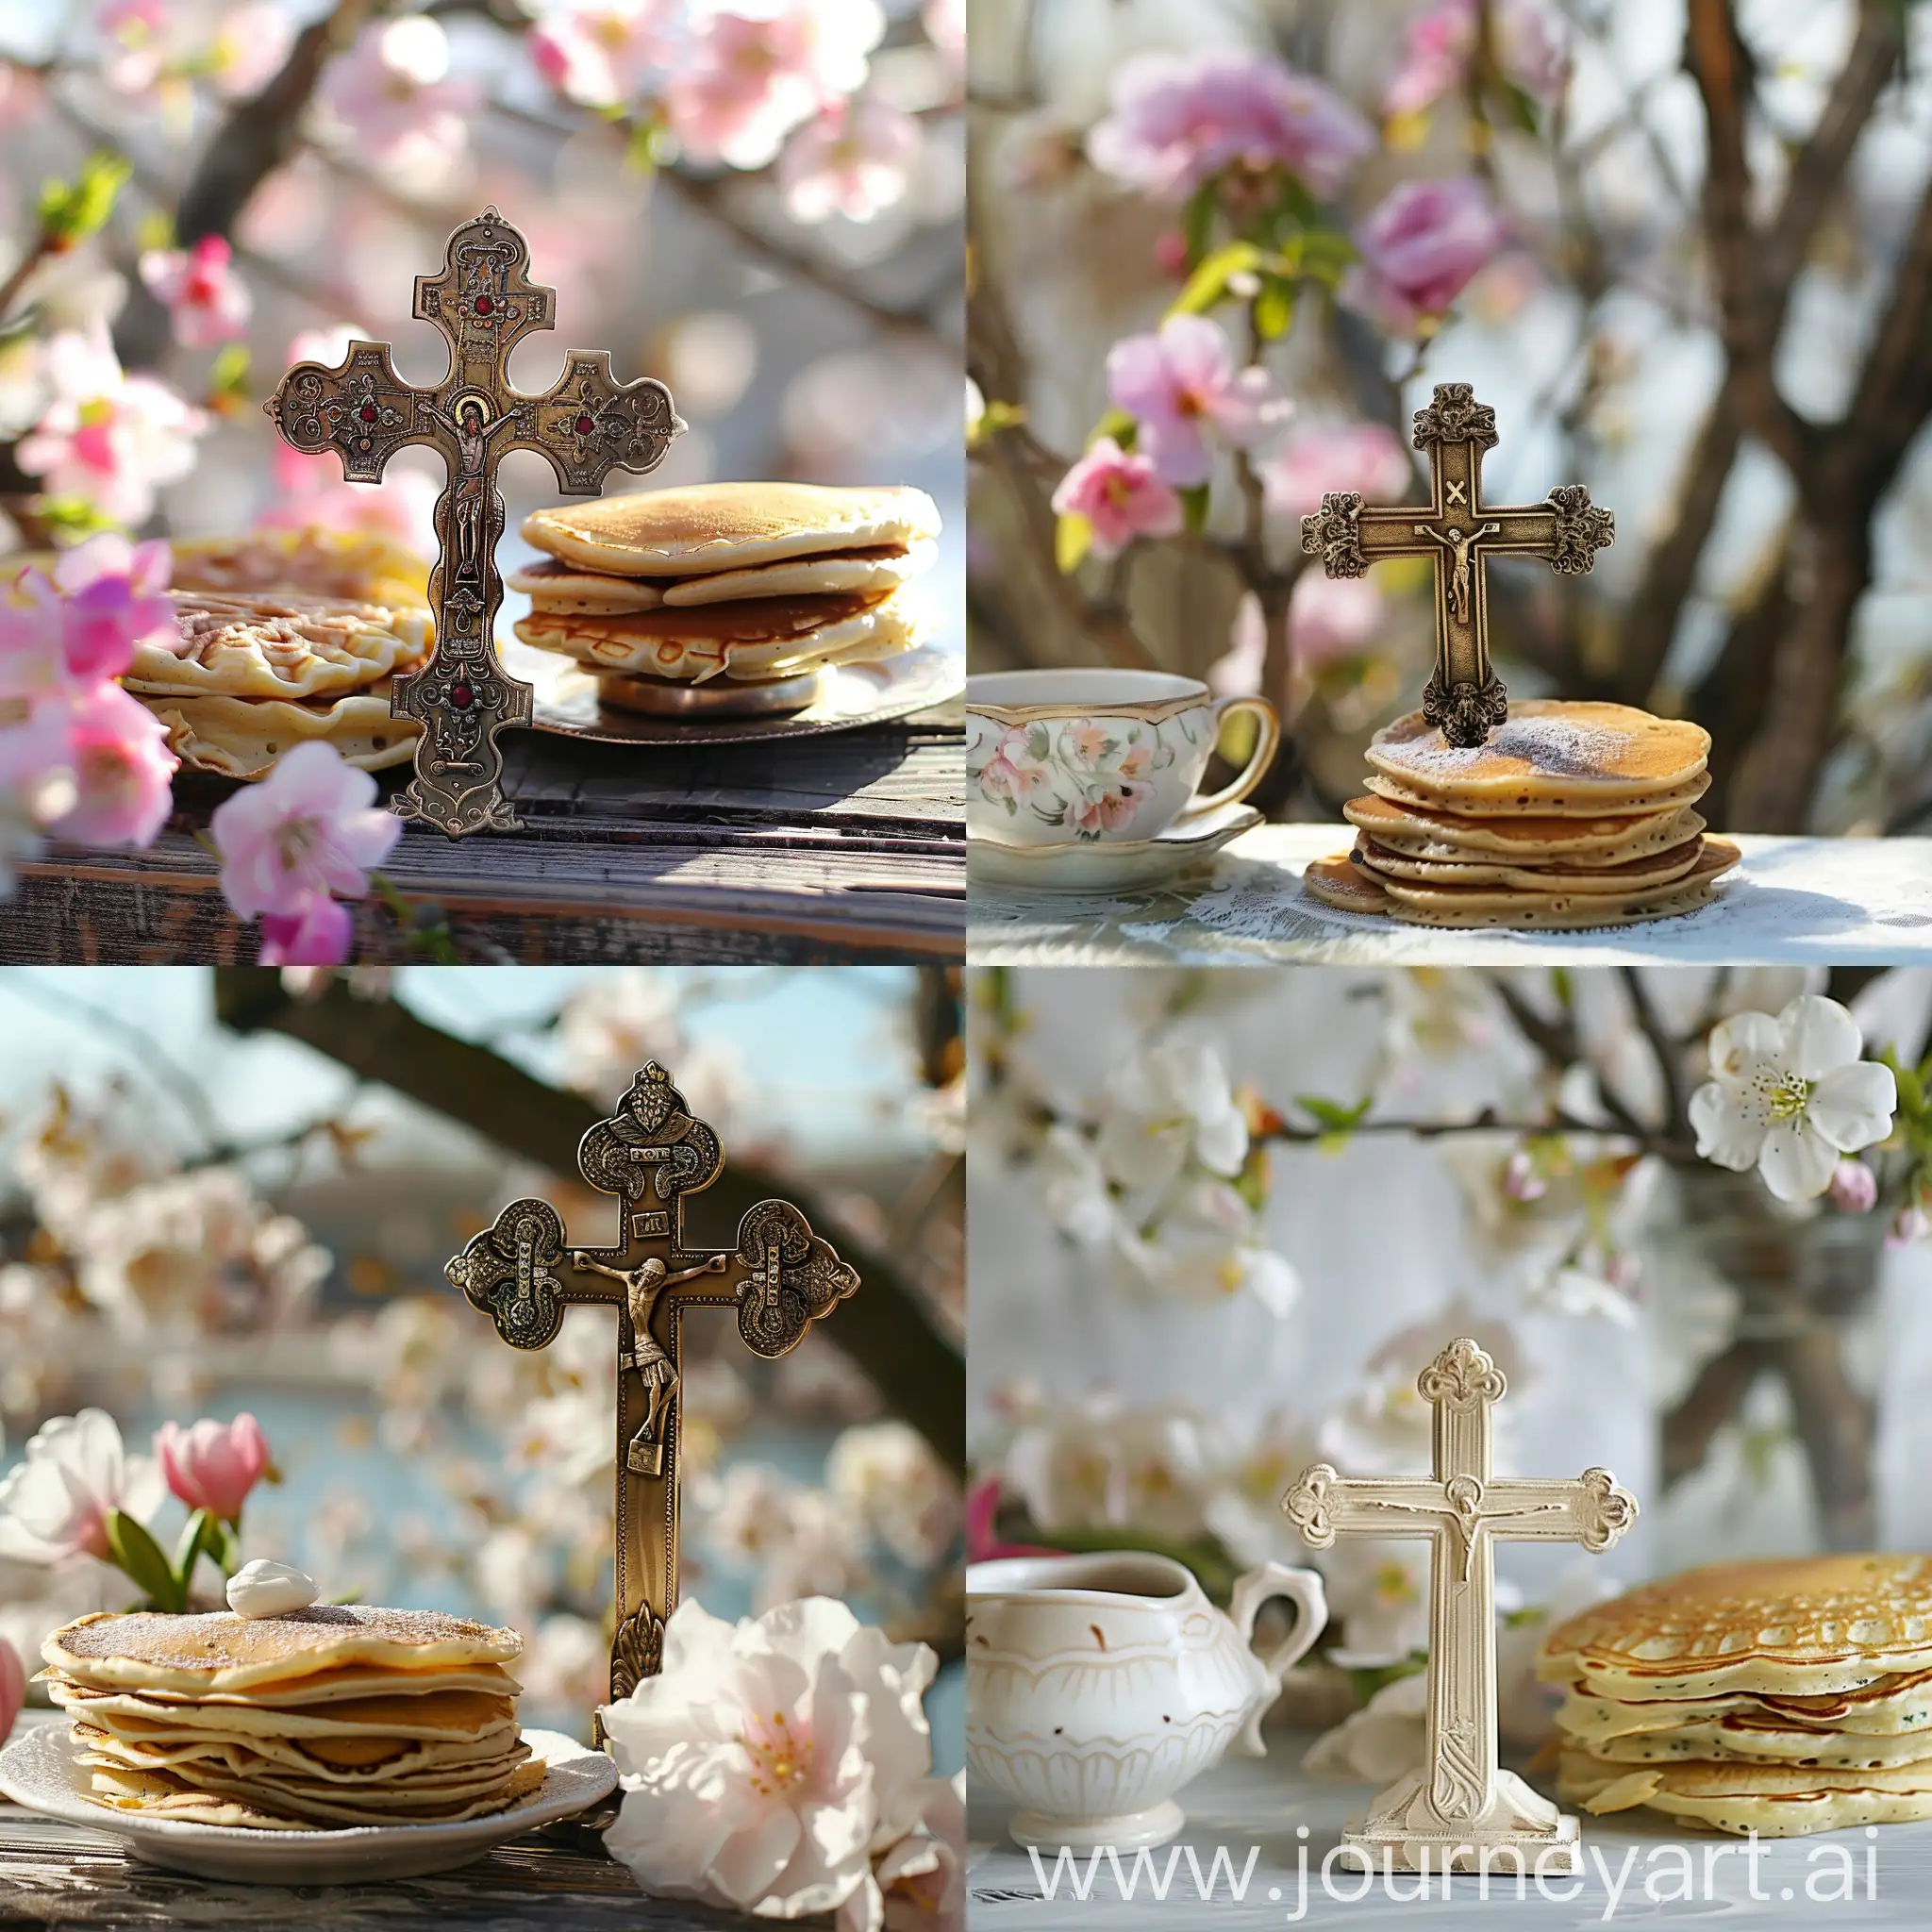 Orthodox-Cross-and-Russian-Pancakes-Symbolic-Table-Setting-in-Early-Spring